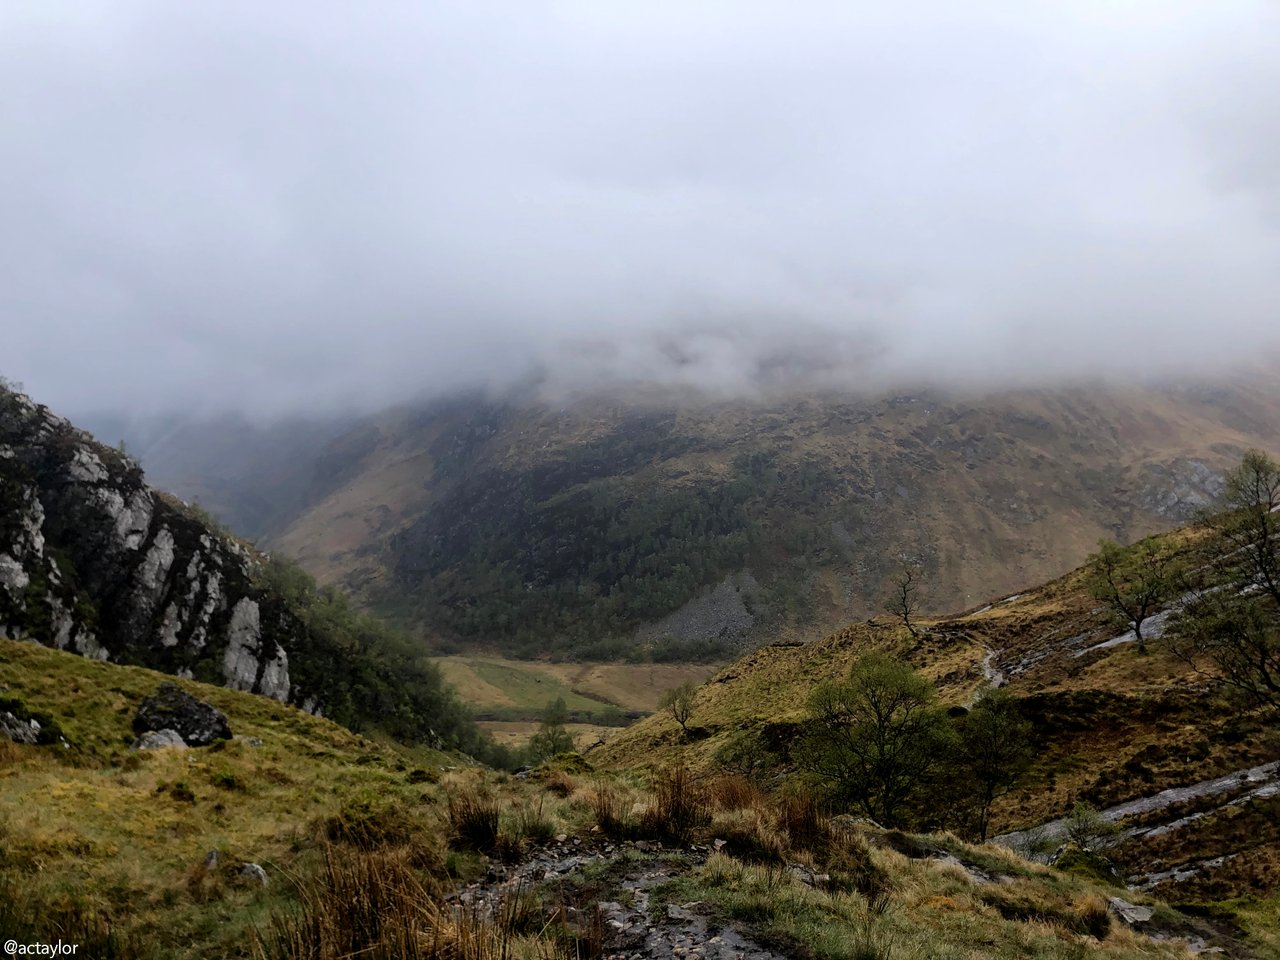 Into the mist: trekking the Ring of Steall